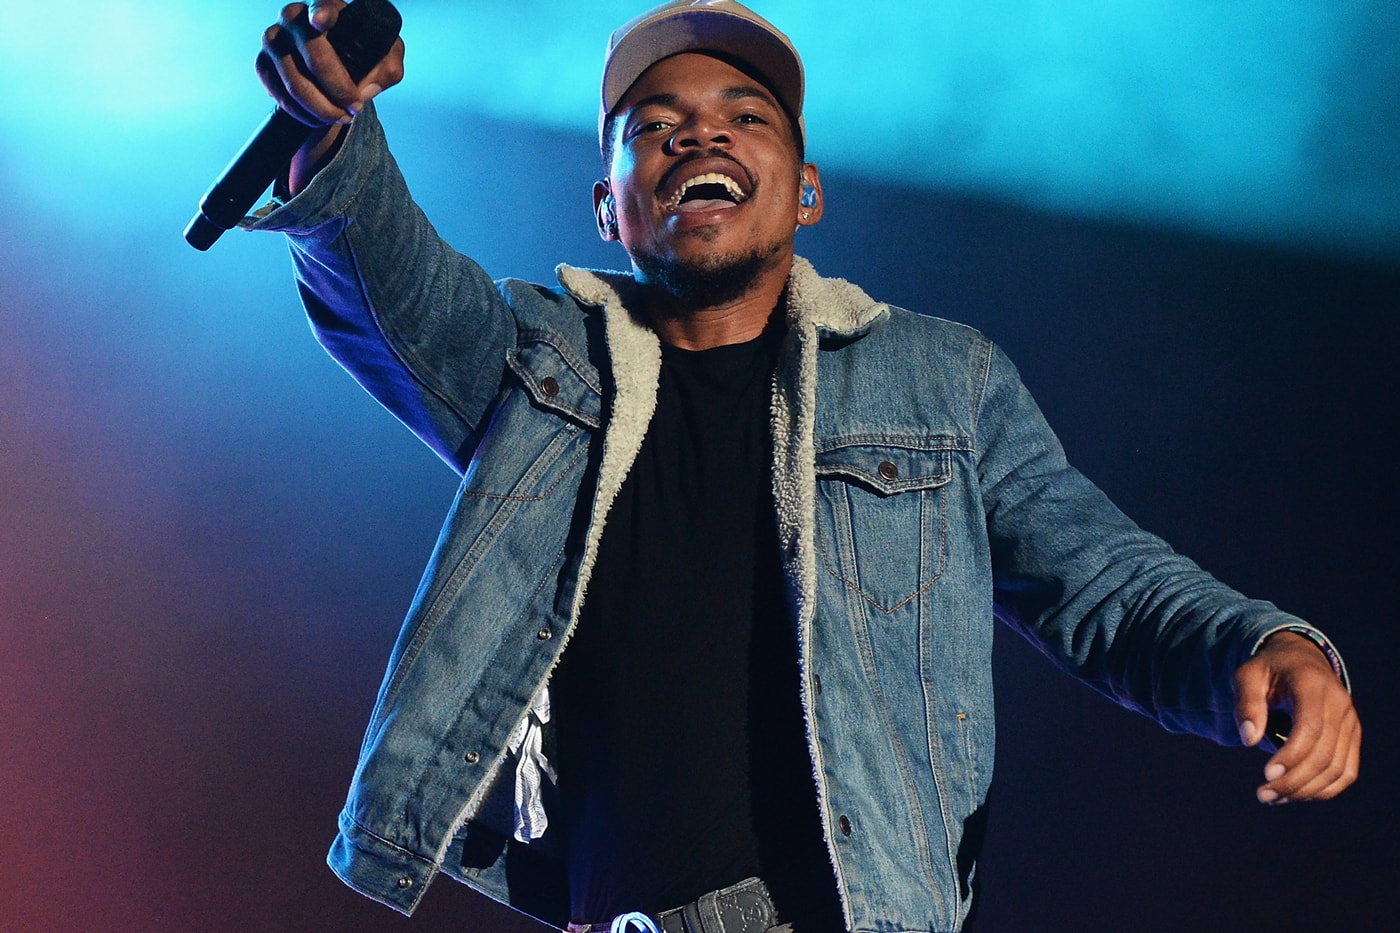 Here Are 10 Highlights of Chance the Rapper's Career